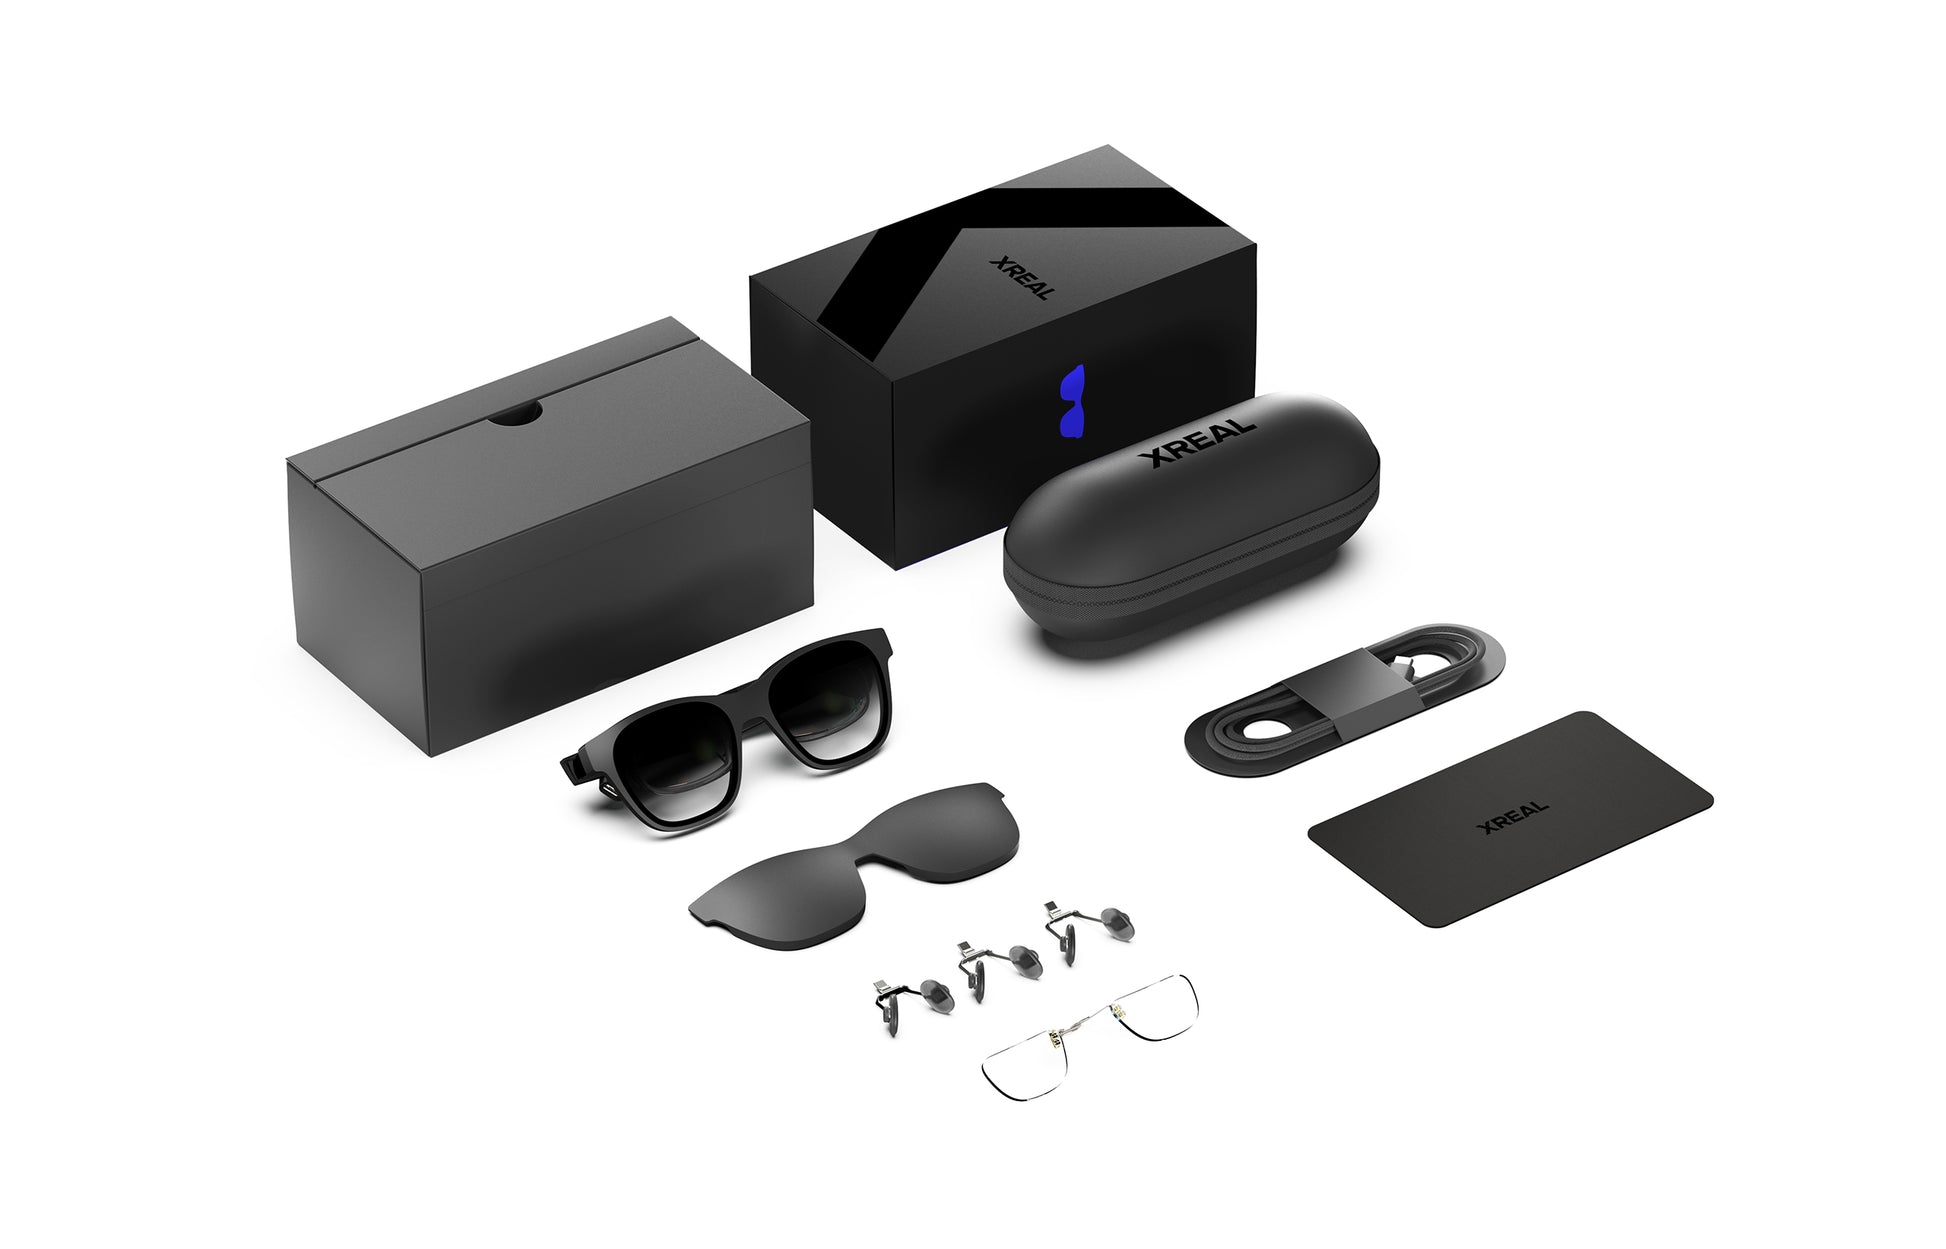  XREAL Air 2 Pro AR Glasses and Beam Bundle, The